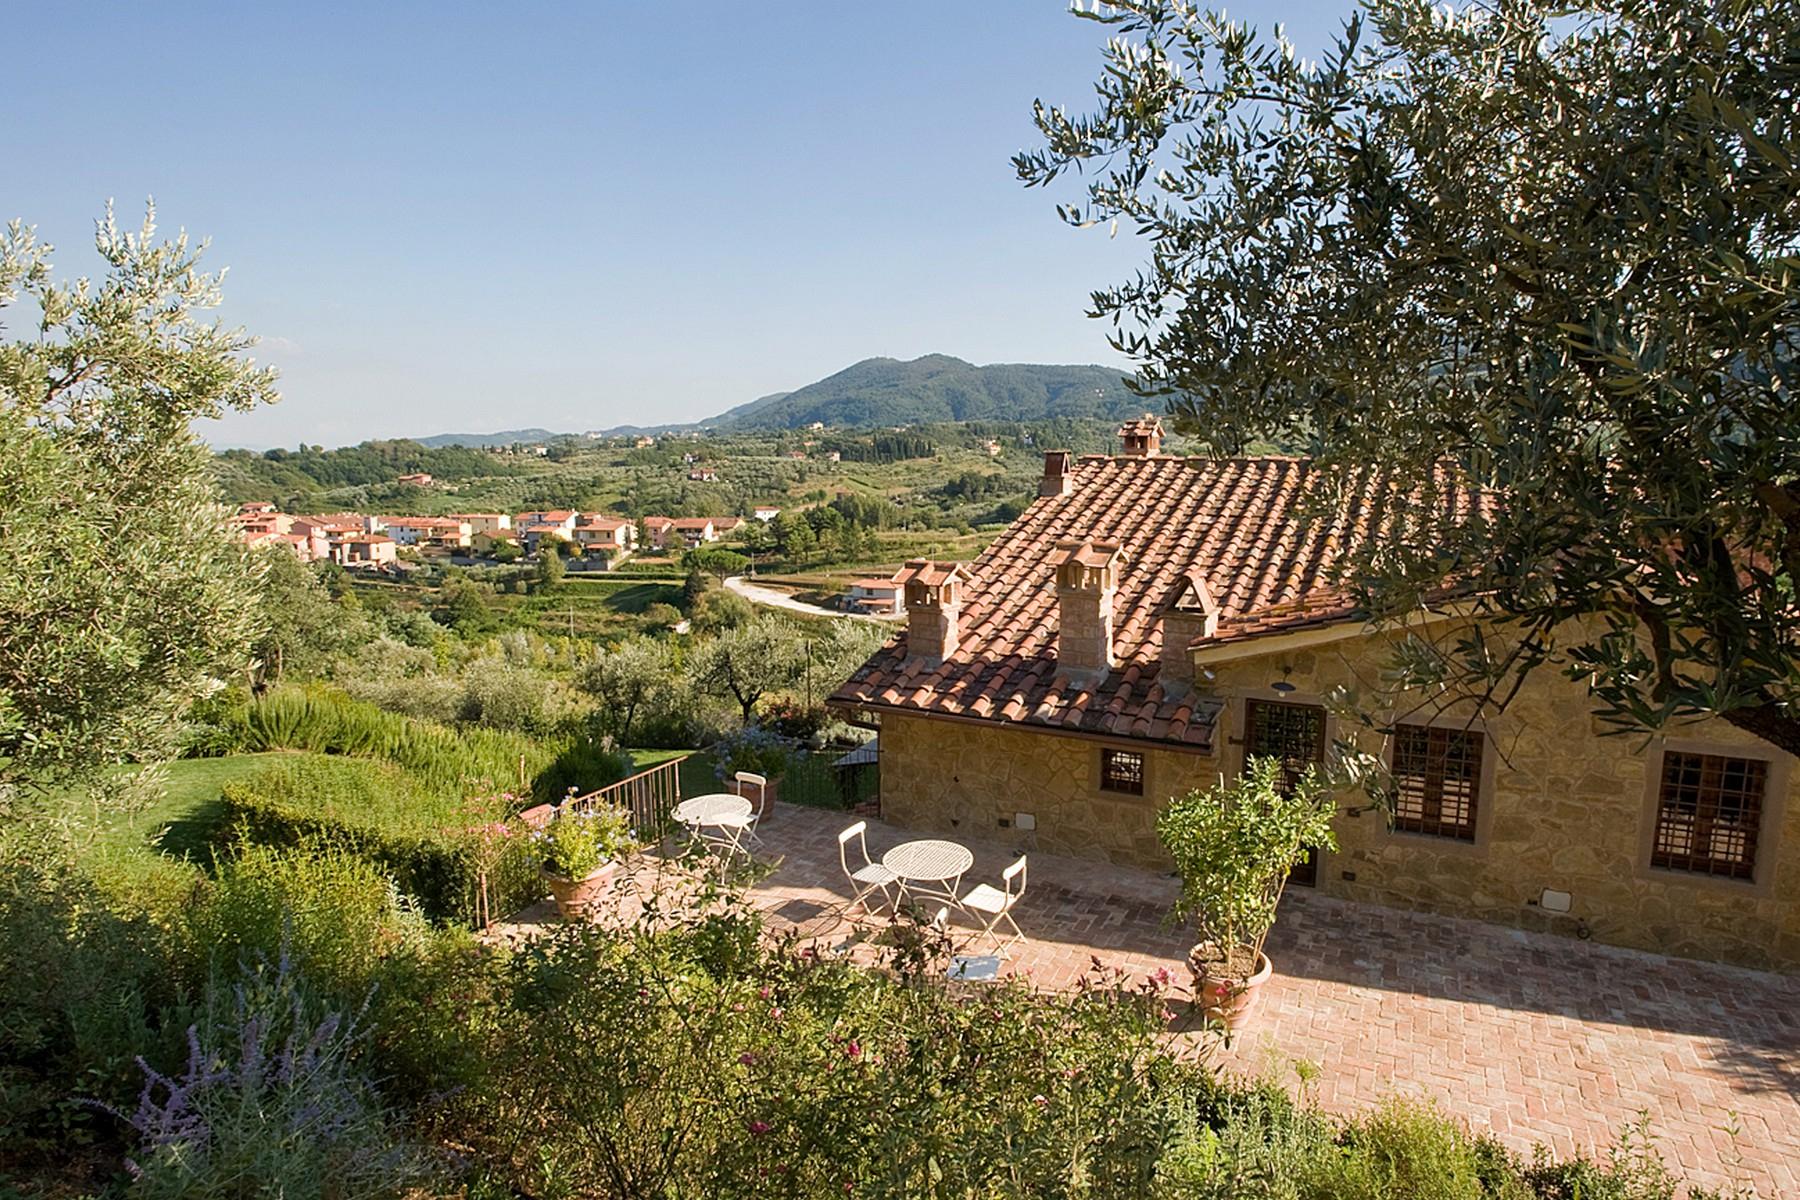 Farmhouse for sale in the Tuscan hills - 20